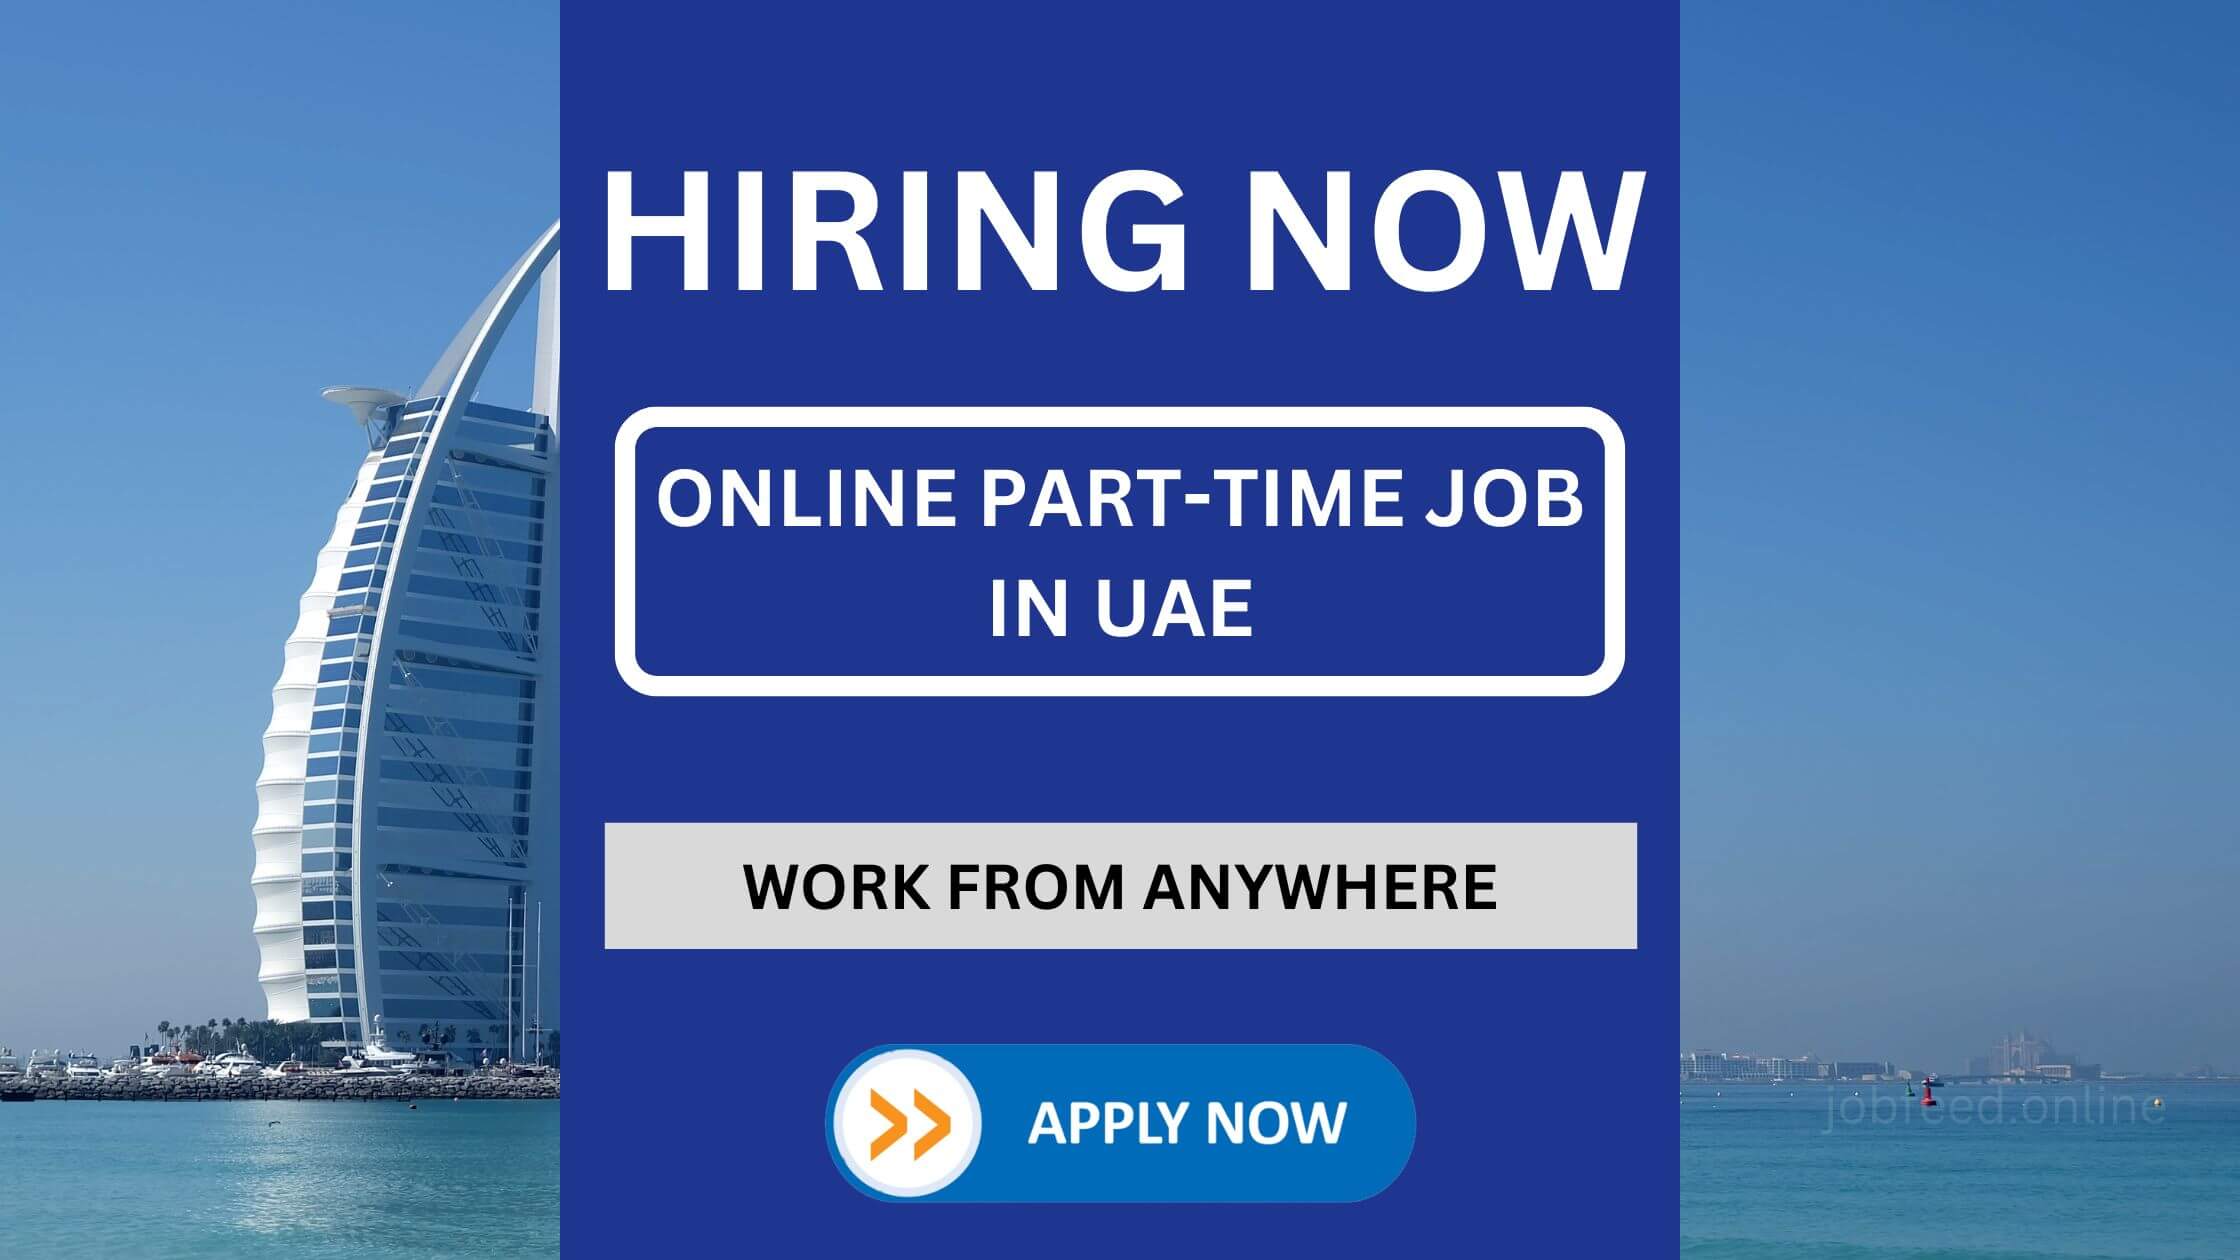 Online Part-Time Job in Dubai for Female: Easy to Apply by Online